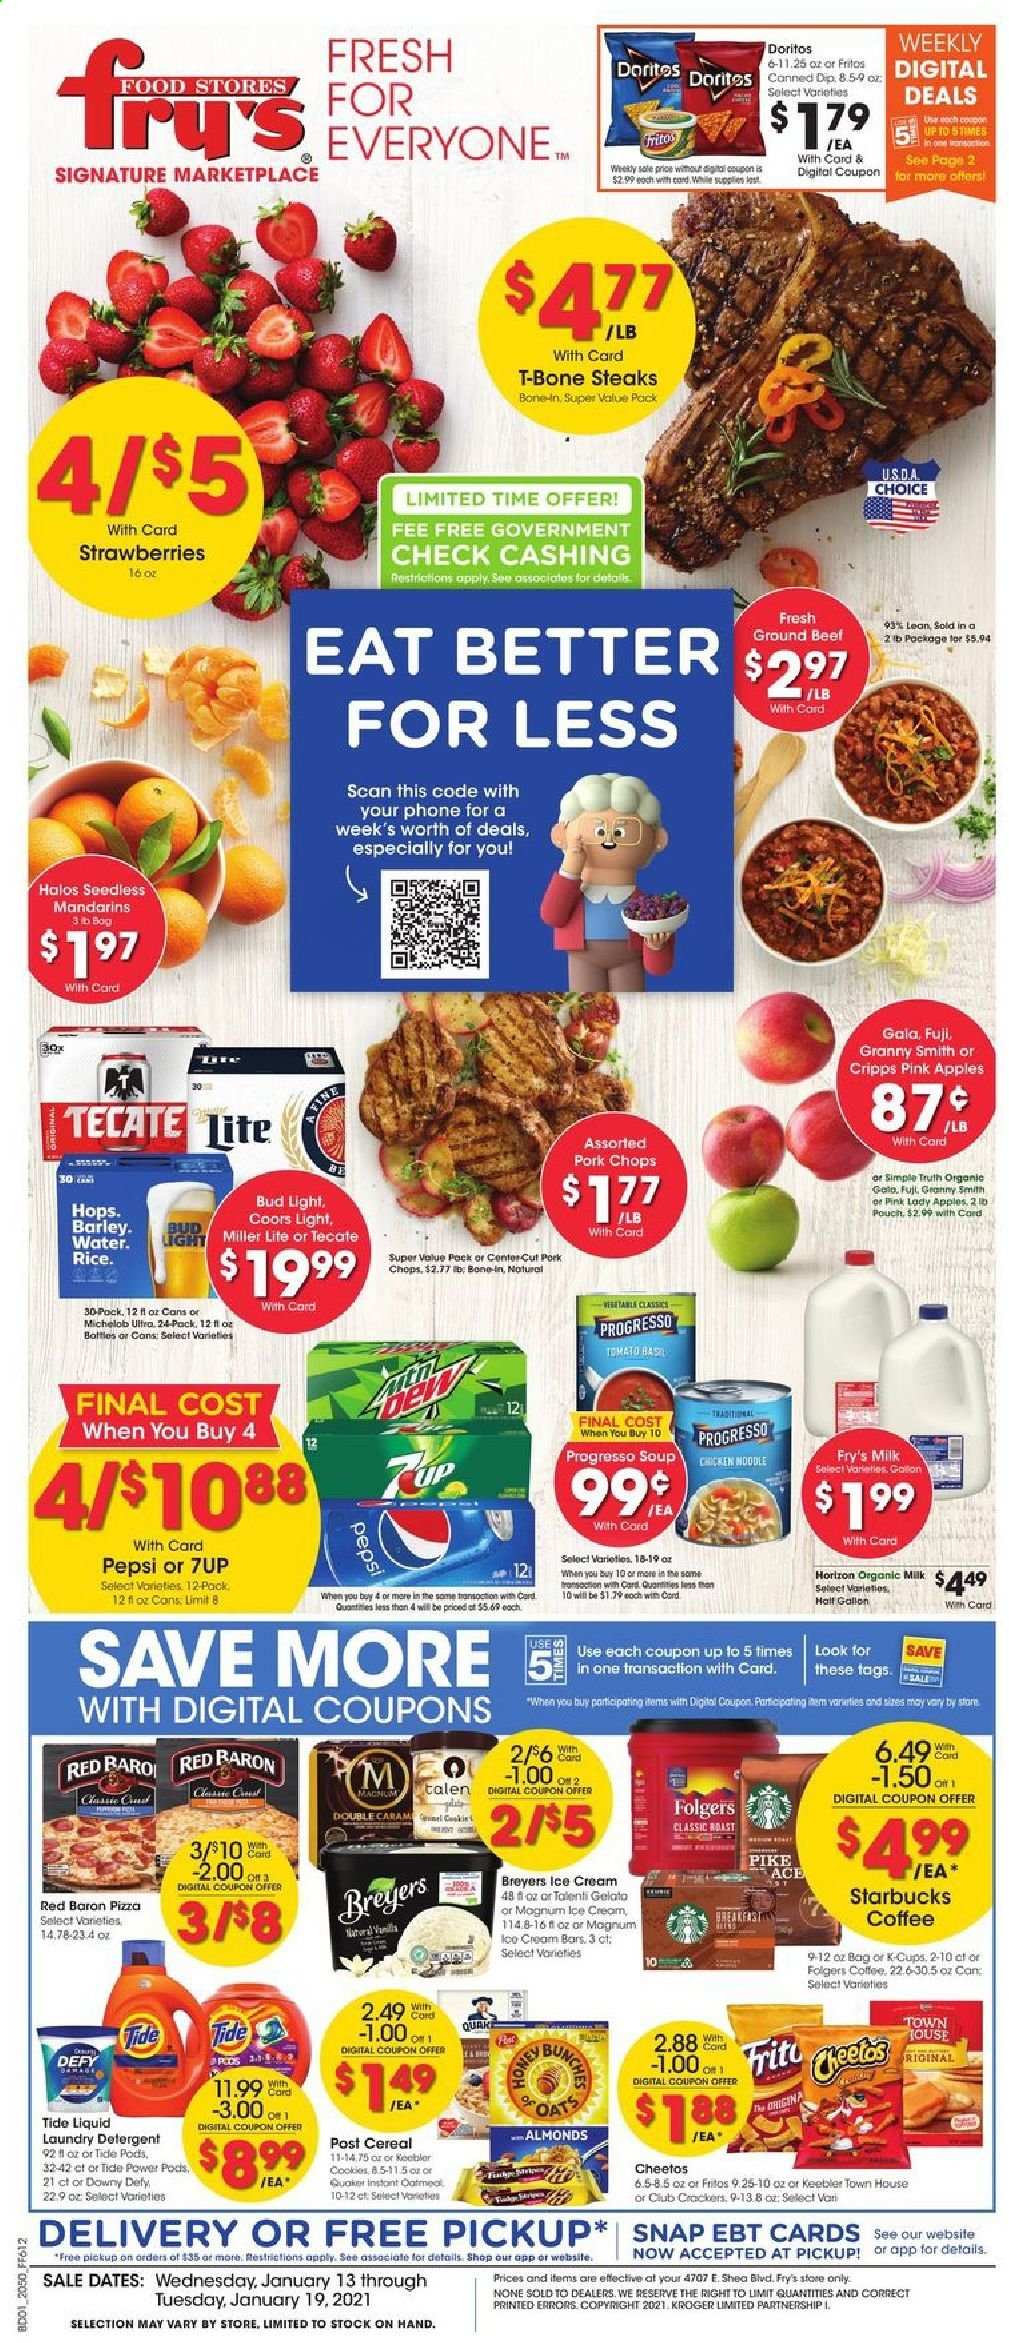 thumbnail - Fry’s Flyer - 01/13/2021 - 01/19/2021 - Sales products - apples, northern pike, pizza, Quaker, Progresso, organic milk, dip, ice cream, Talenti Gelato, gelato, strawberries, Red Baron, cookies, crackers, Keebler, Doritos, Cheetos, oatmeal, mandarines, cereals, Fritos, almonds, Pepsi, 7UP, coffee, Starbucks, Folgers, coffee capsules, K-Cups, beer, Miller Lite, Coors, Michelob, Bud Light, beef meat, ground beef, t-bone steak, steak, pork chops, pork meat, detergent, Ace, Tide, laundry detergent, lens. Page 1.